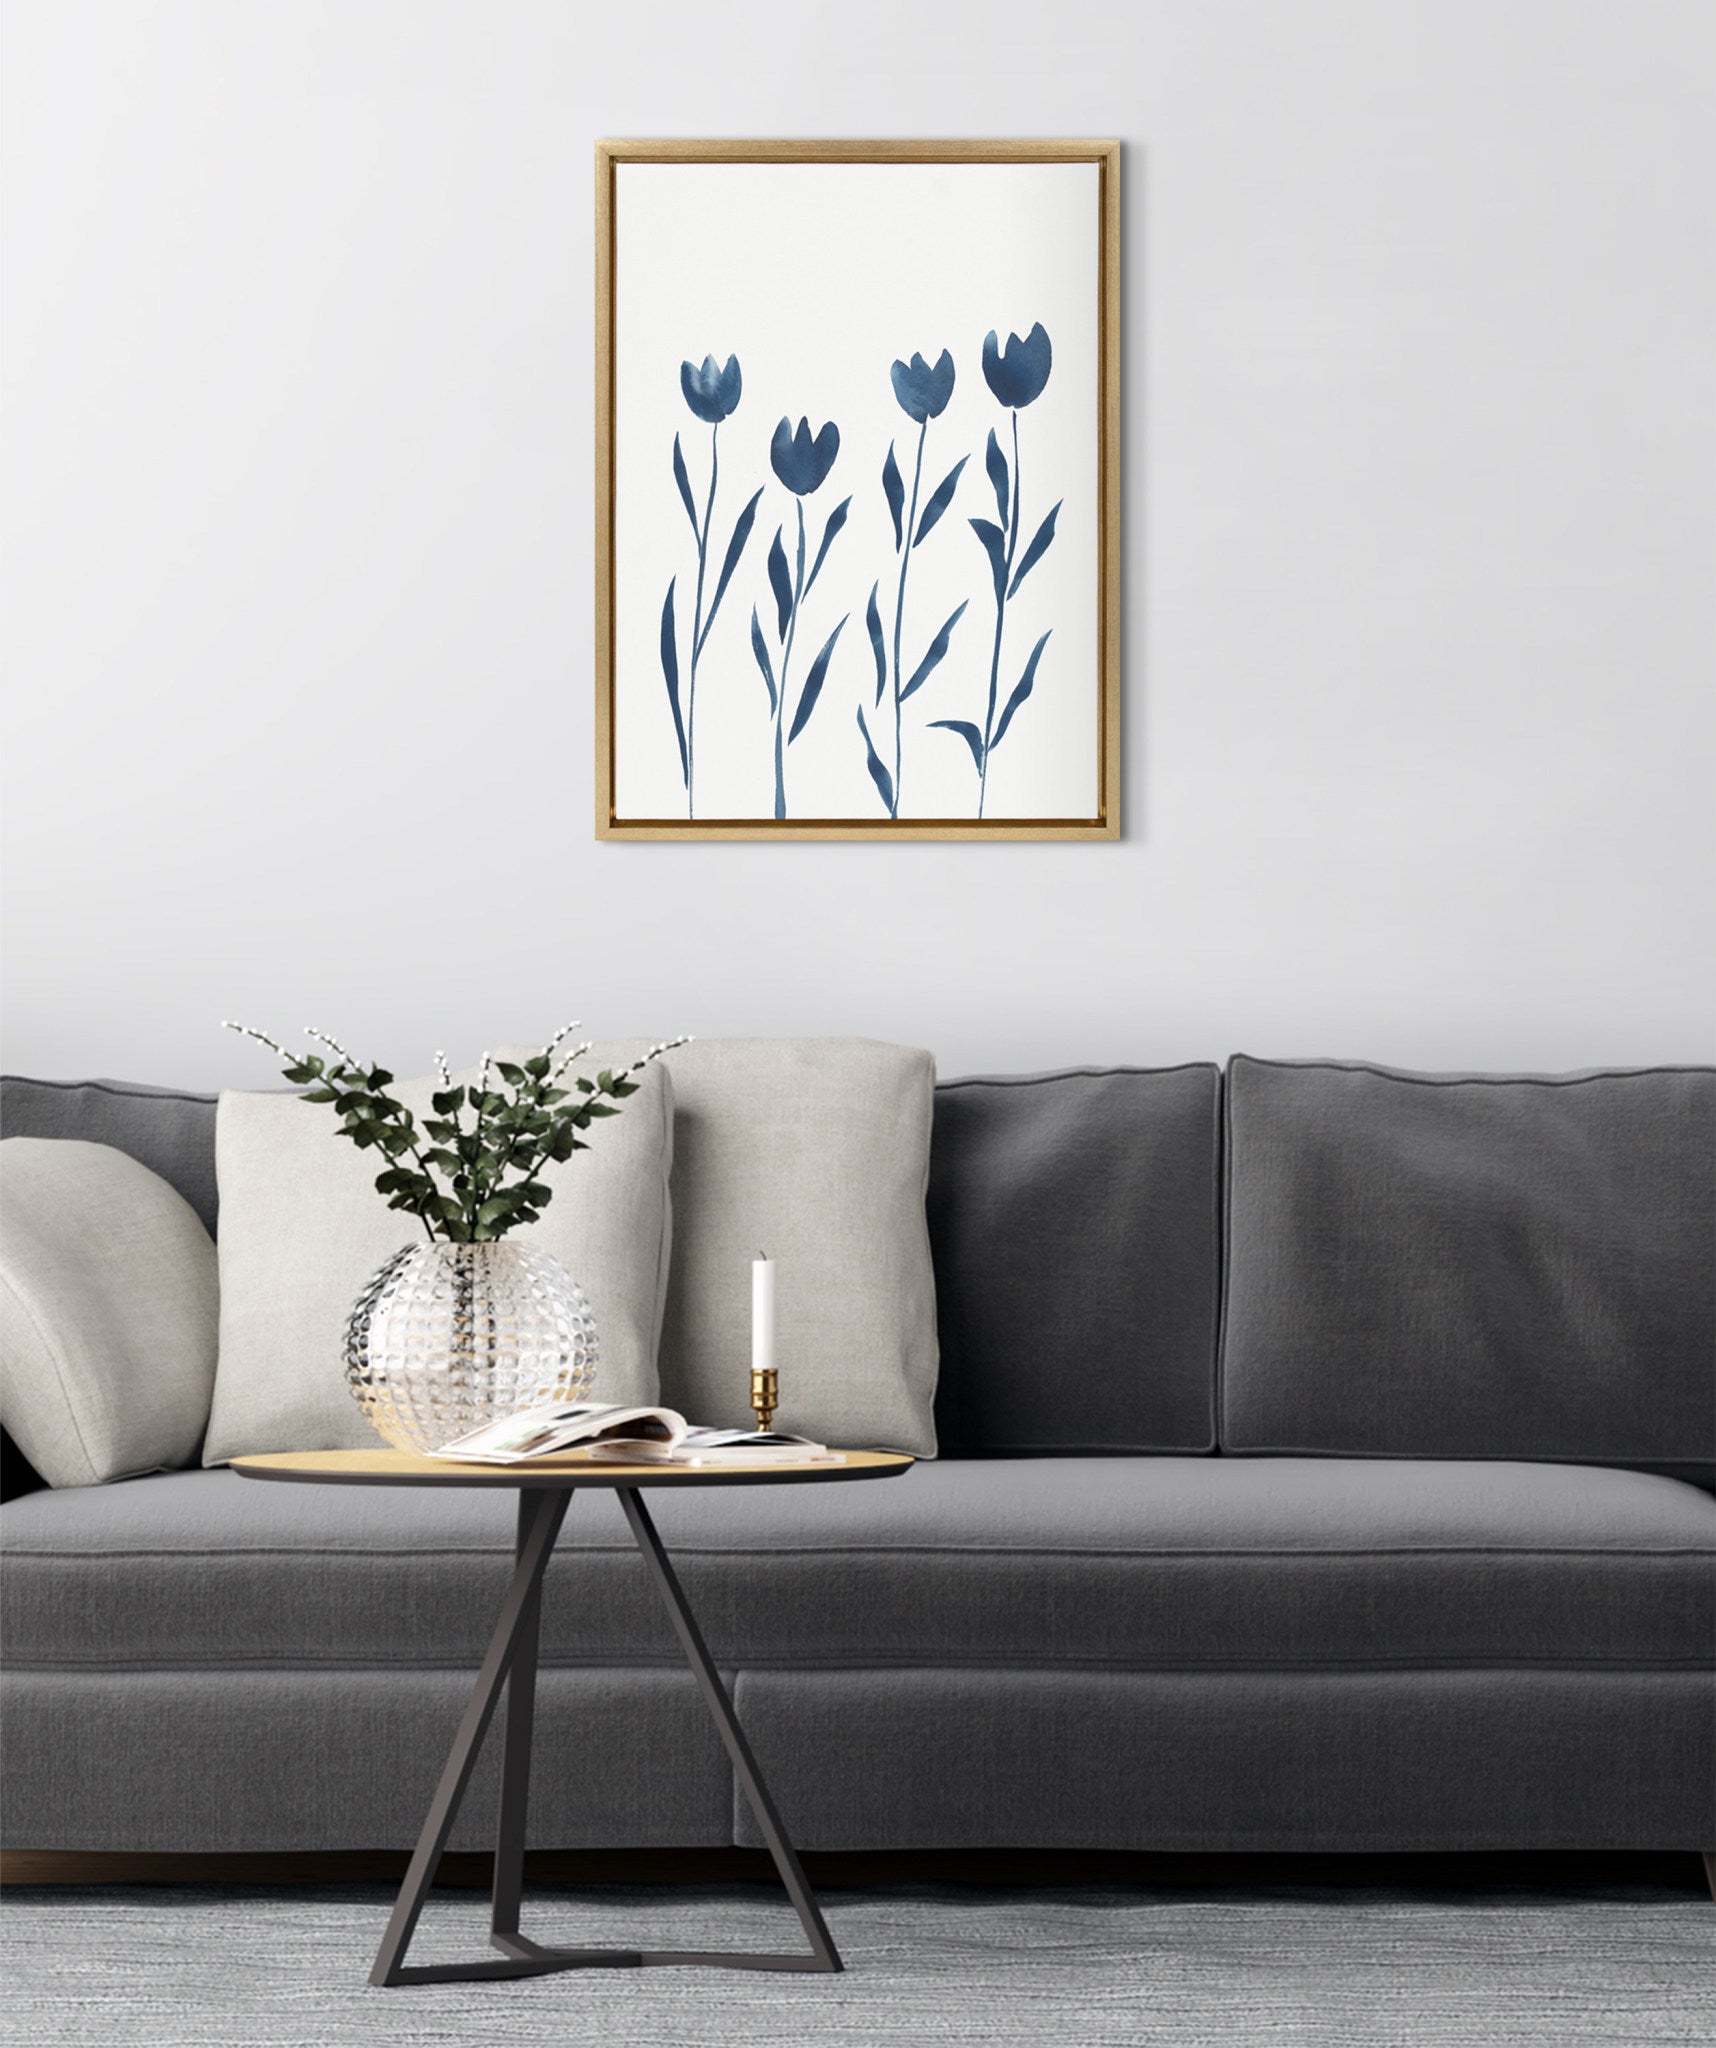 Sylvie Indigo Tulips on White Framed Canvas by Teju Reval of SnazzyHues